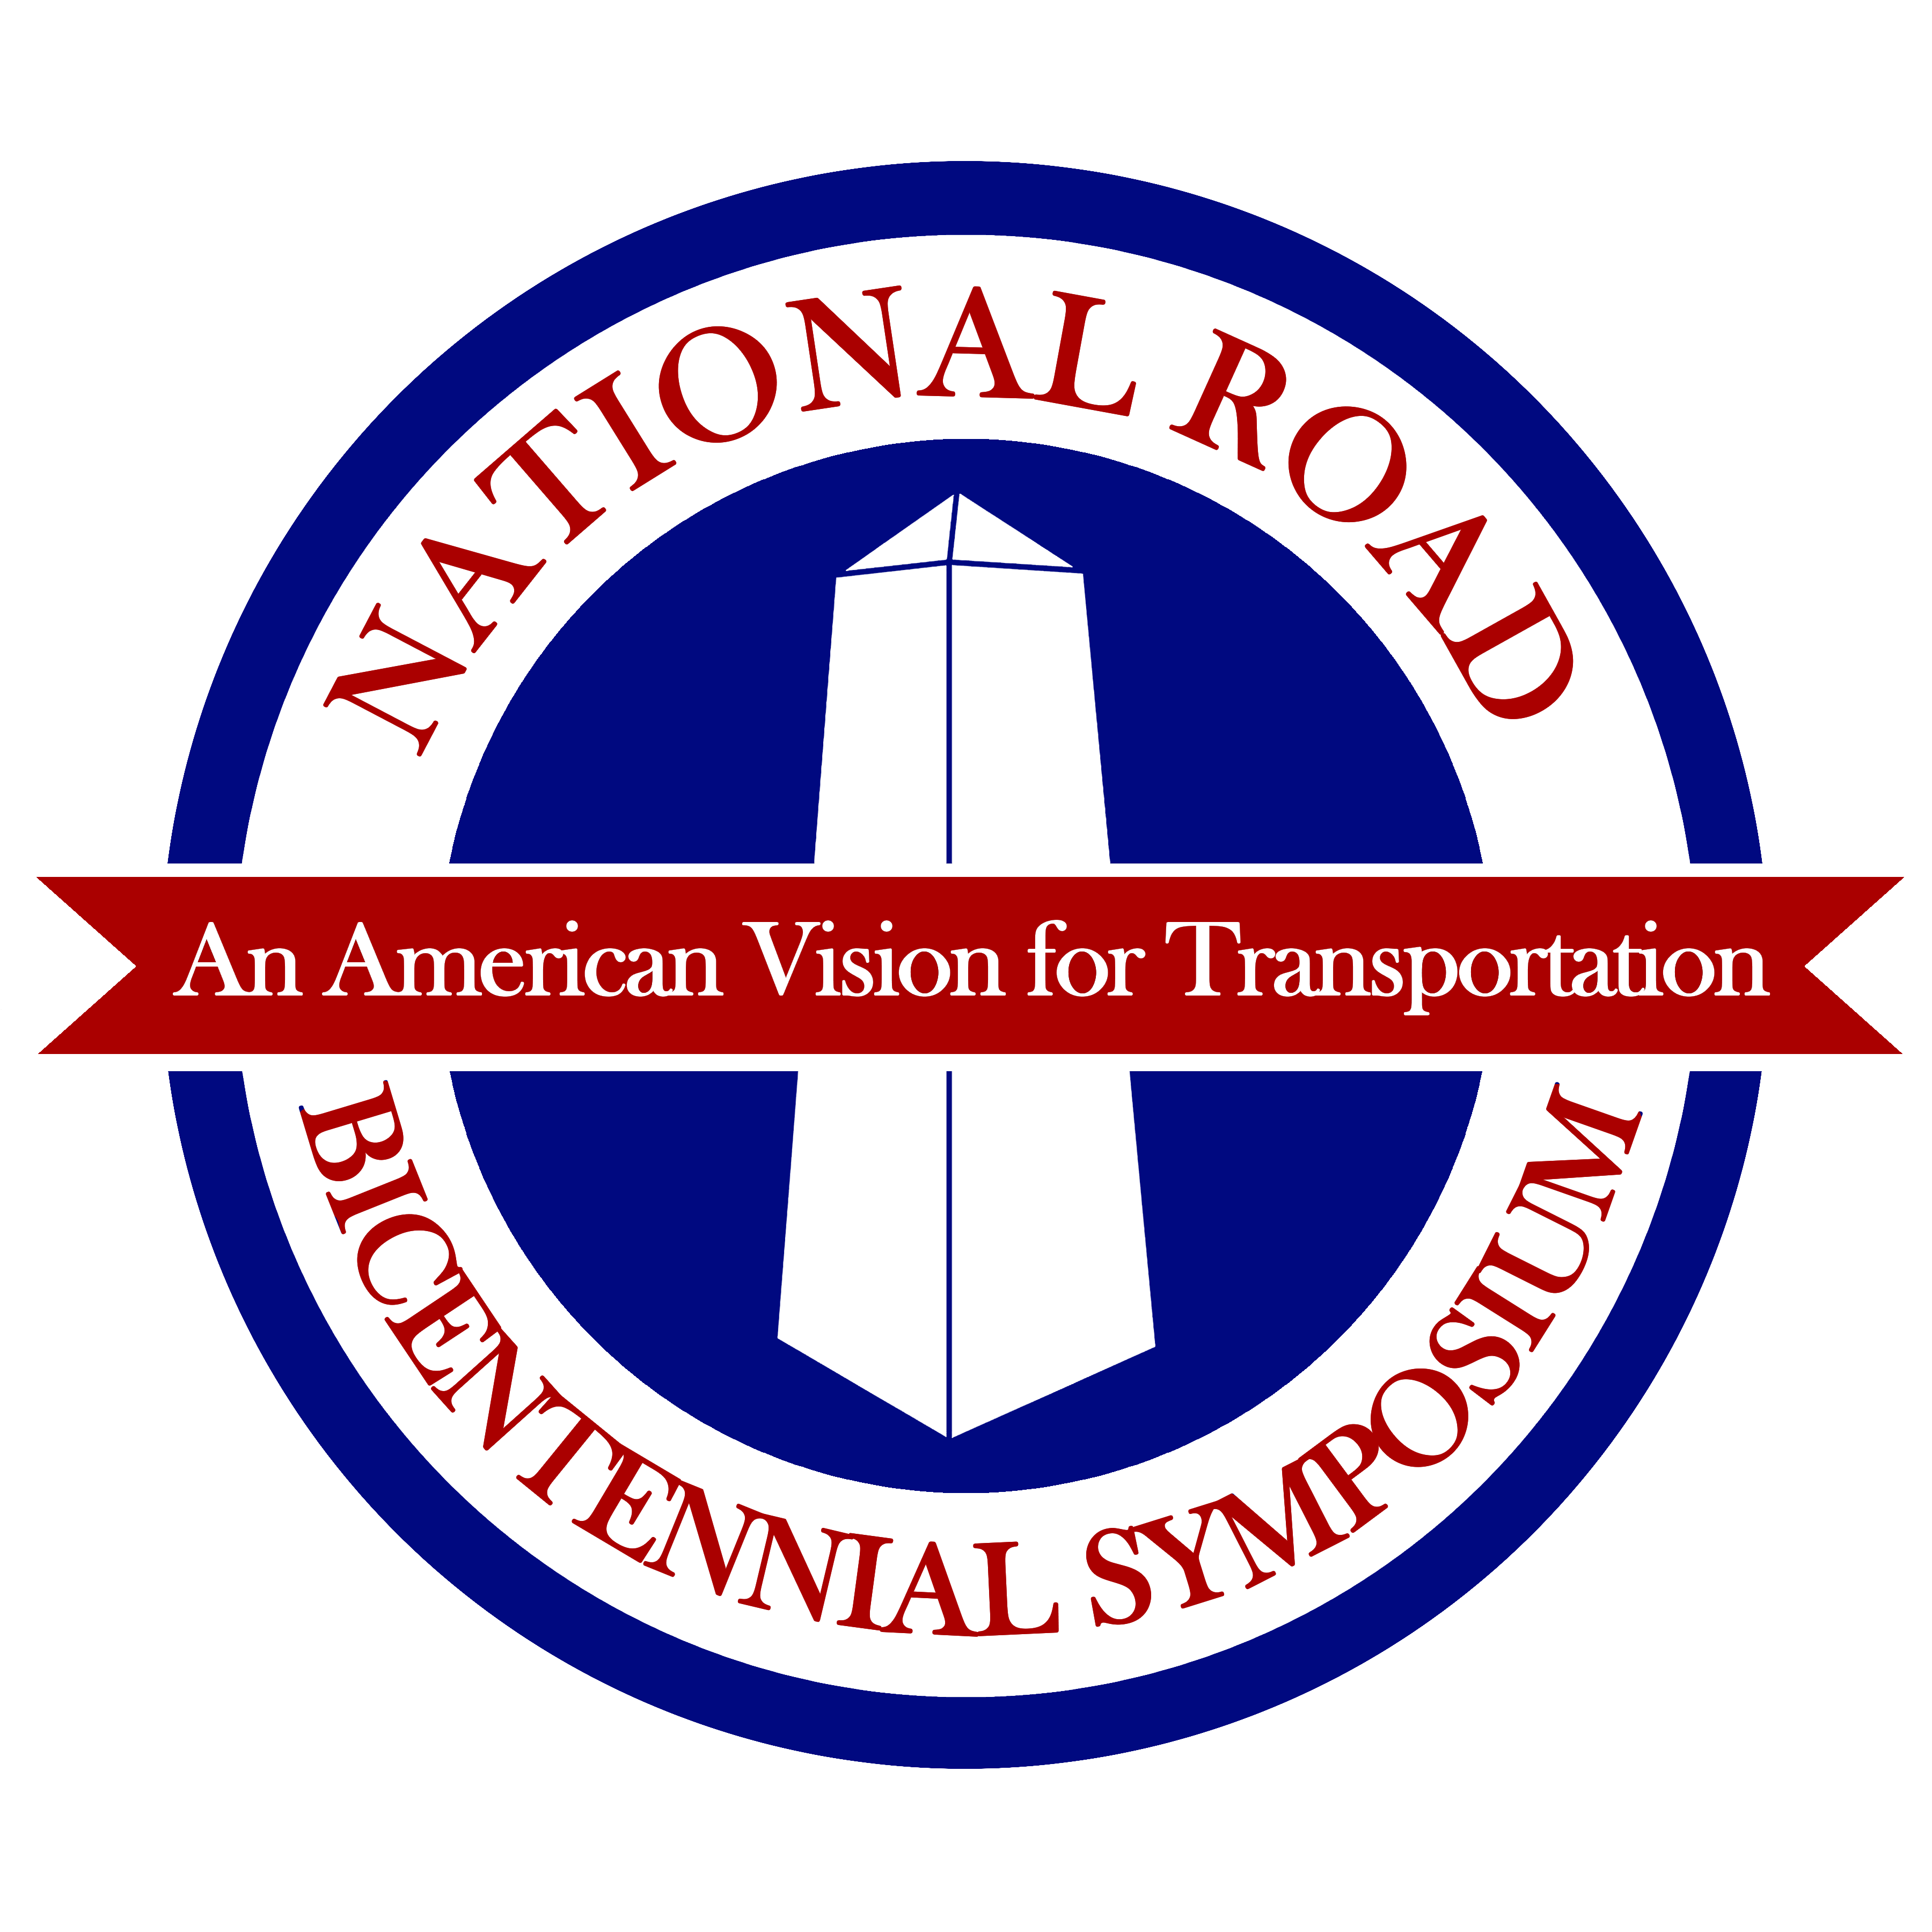 National Road Bicentennial Logo designed by a volunteer at Friendship Hill National Historic Site